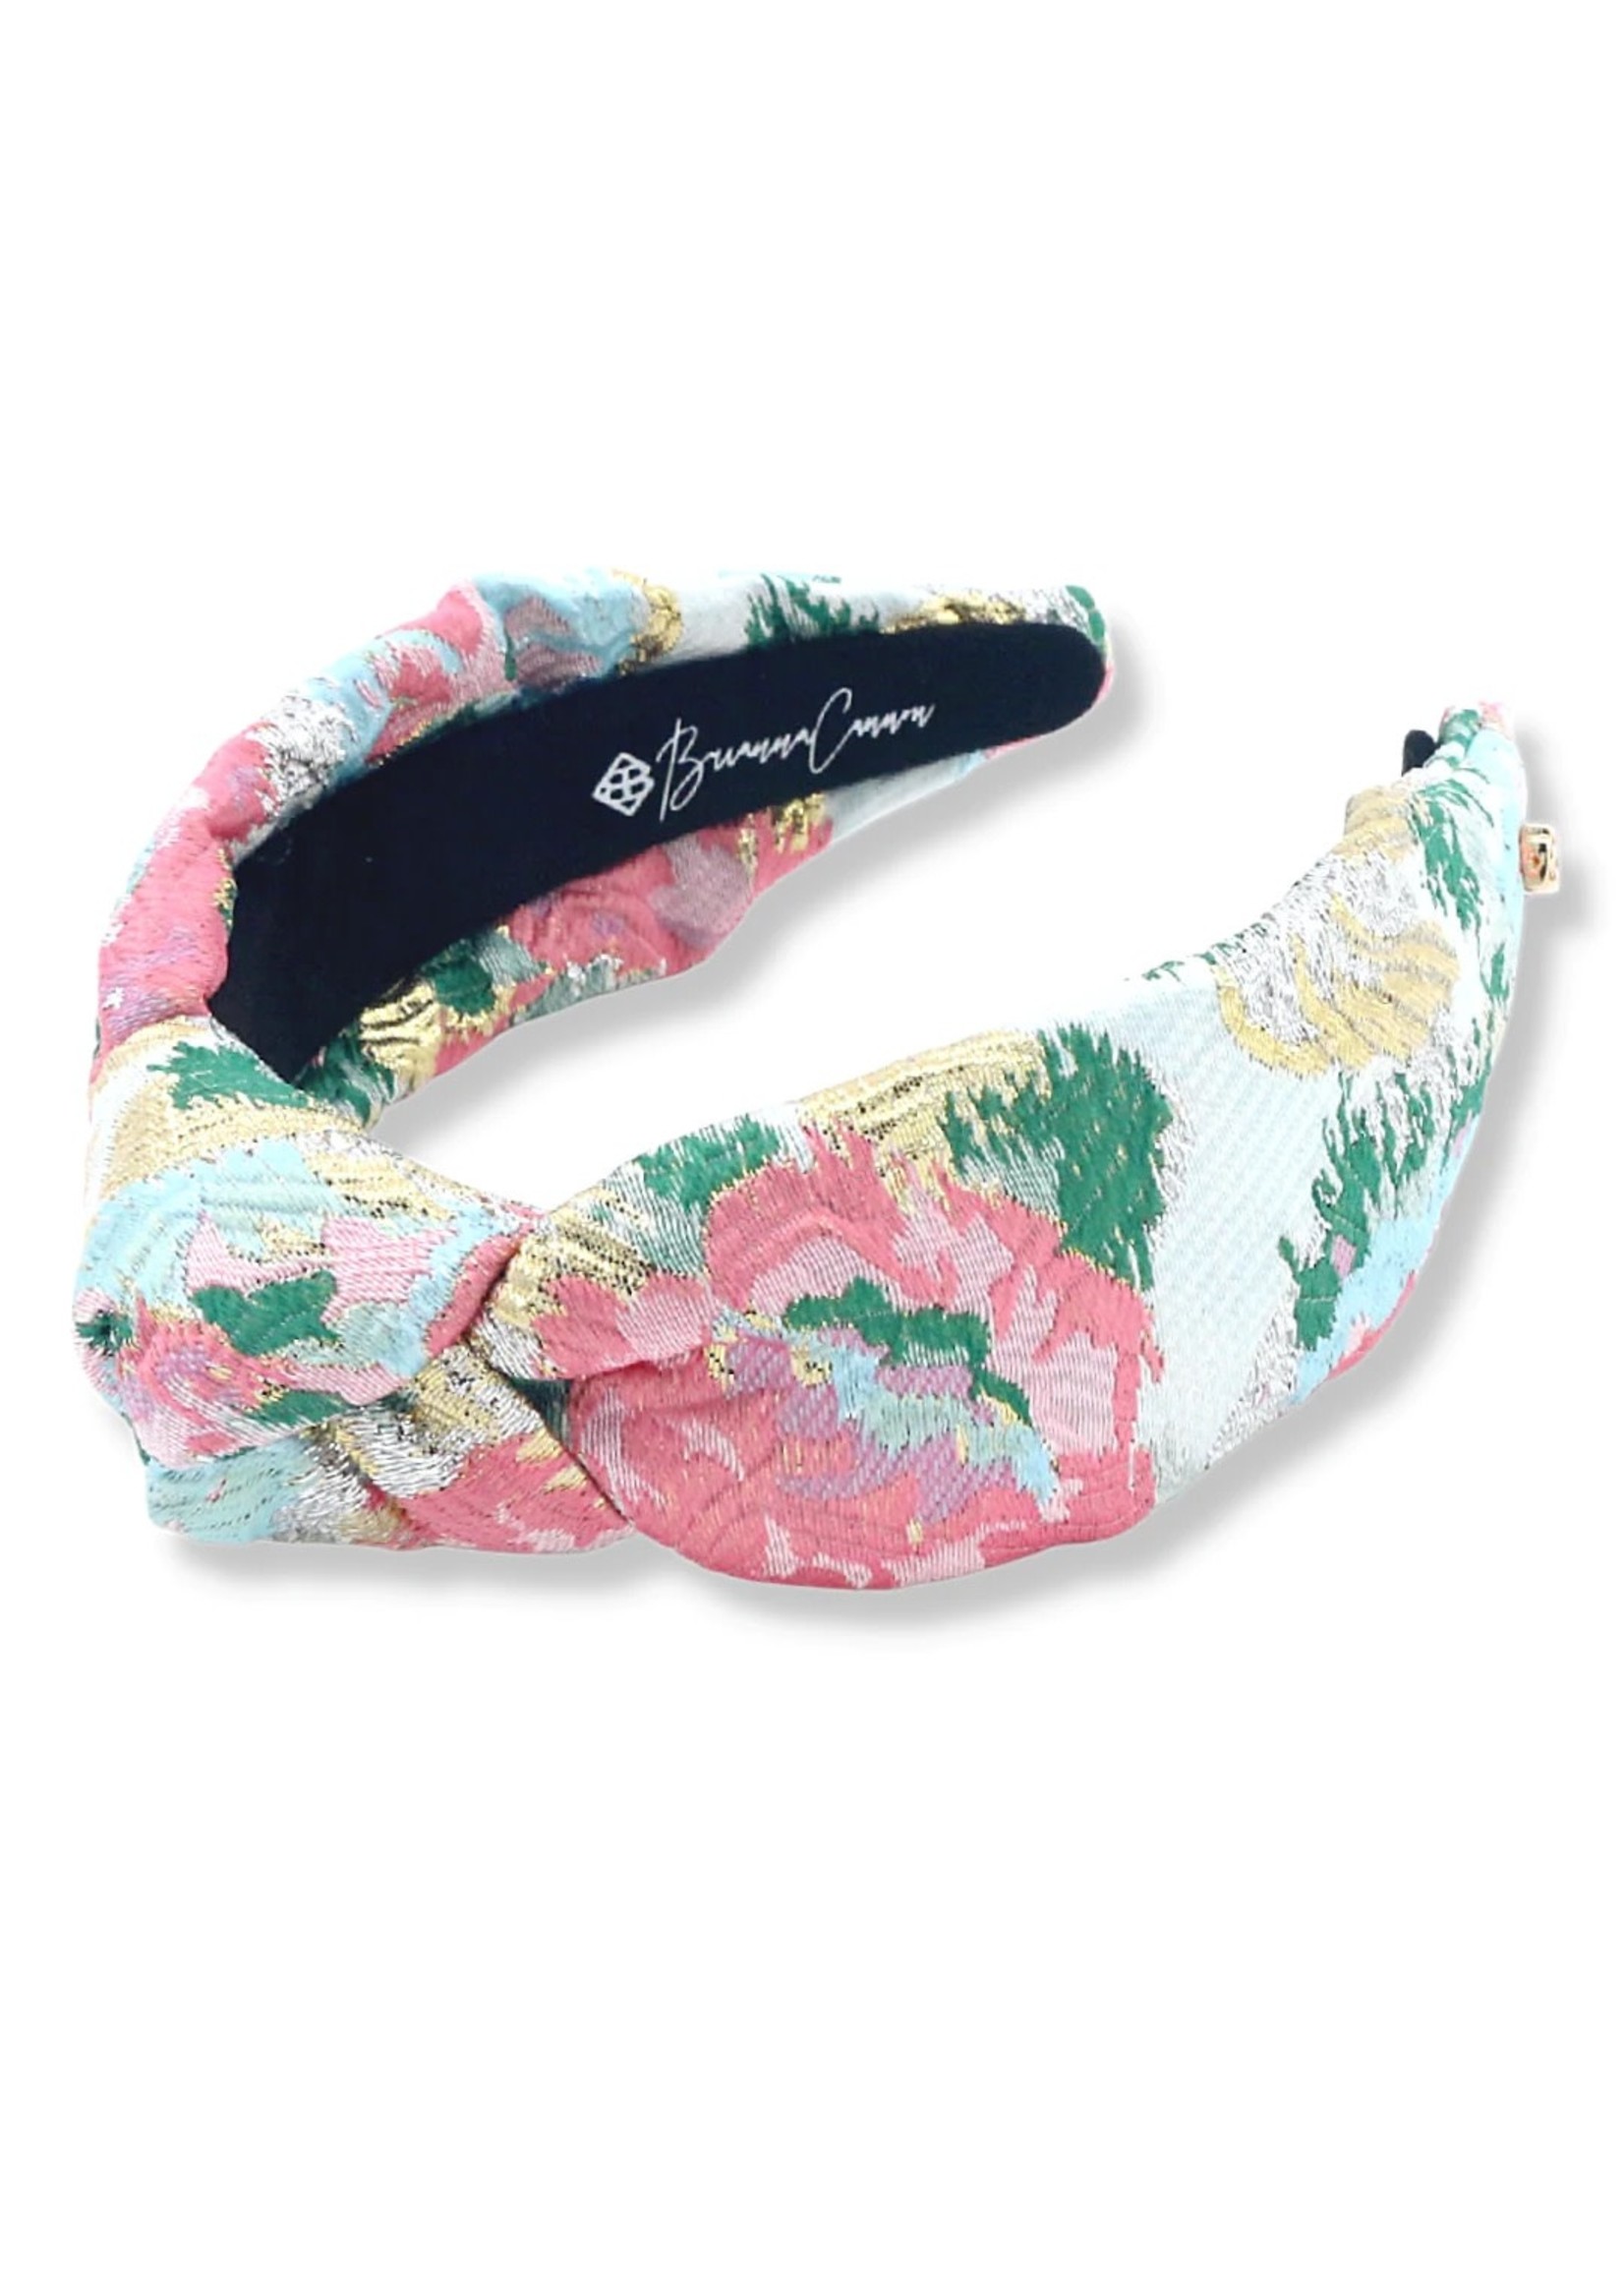 Brianna Cannon ADULT SIZE SPRING FLORAL BROCADE HEADBAND